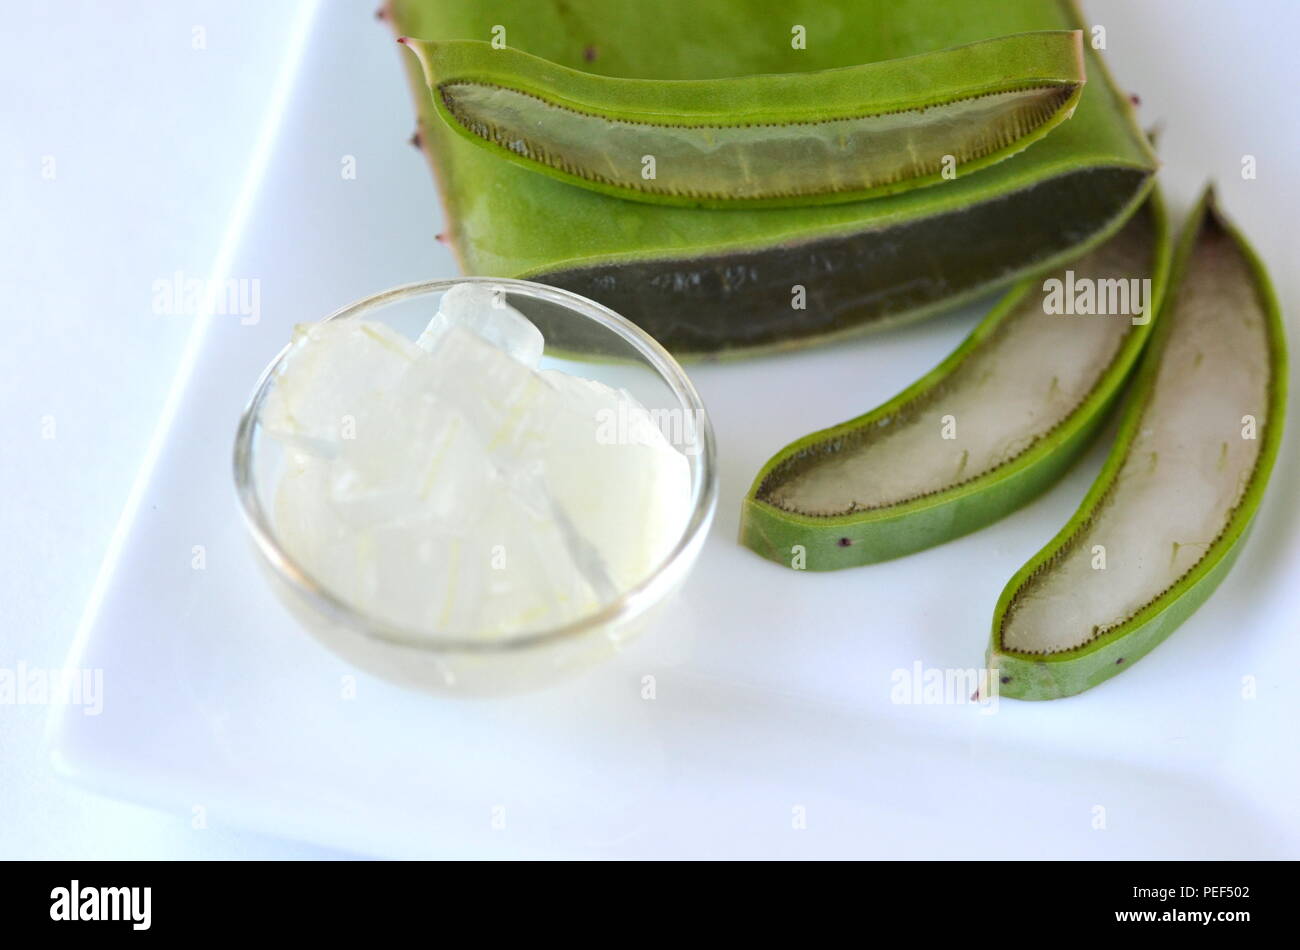 Fresh Cut Aloe Vera Plant Leaves With Clear Diced Gel In A Glass